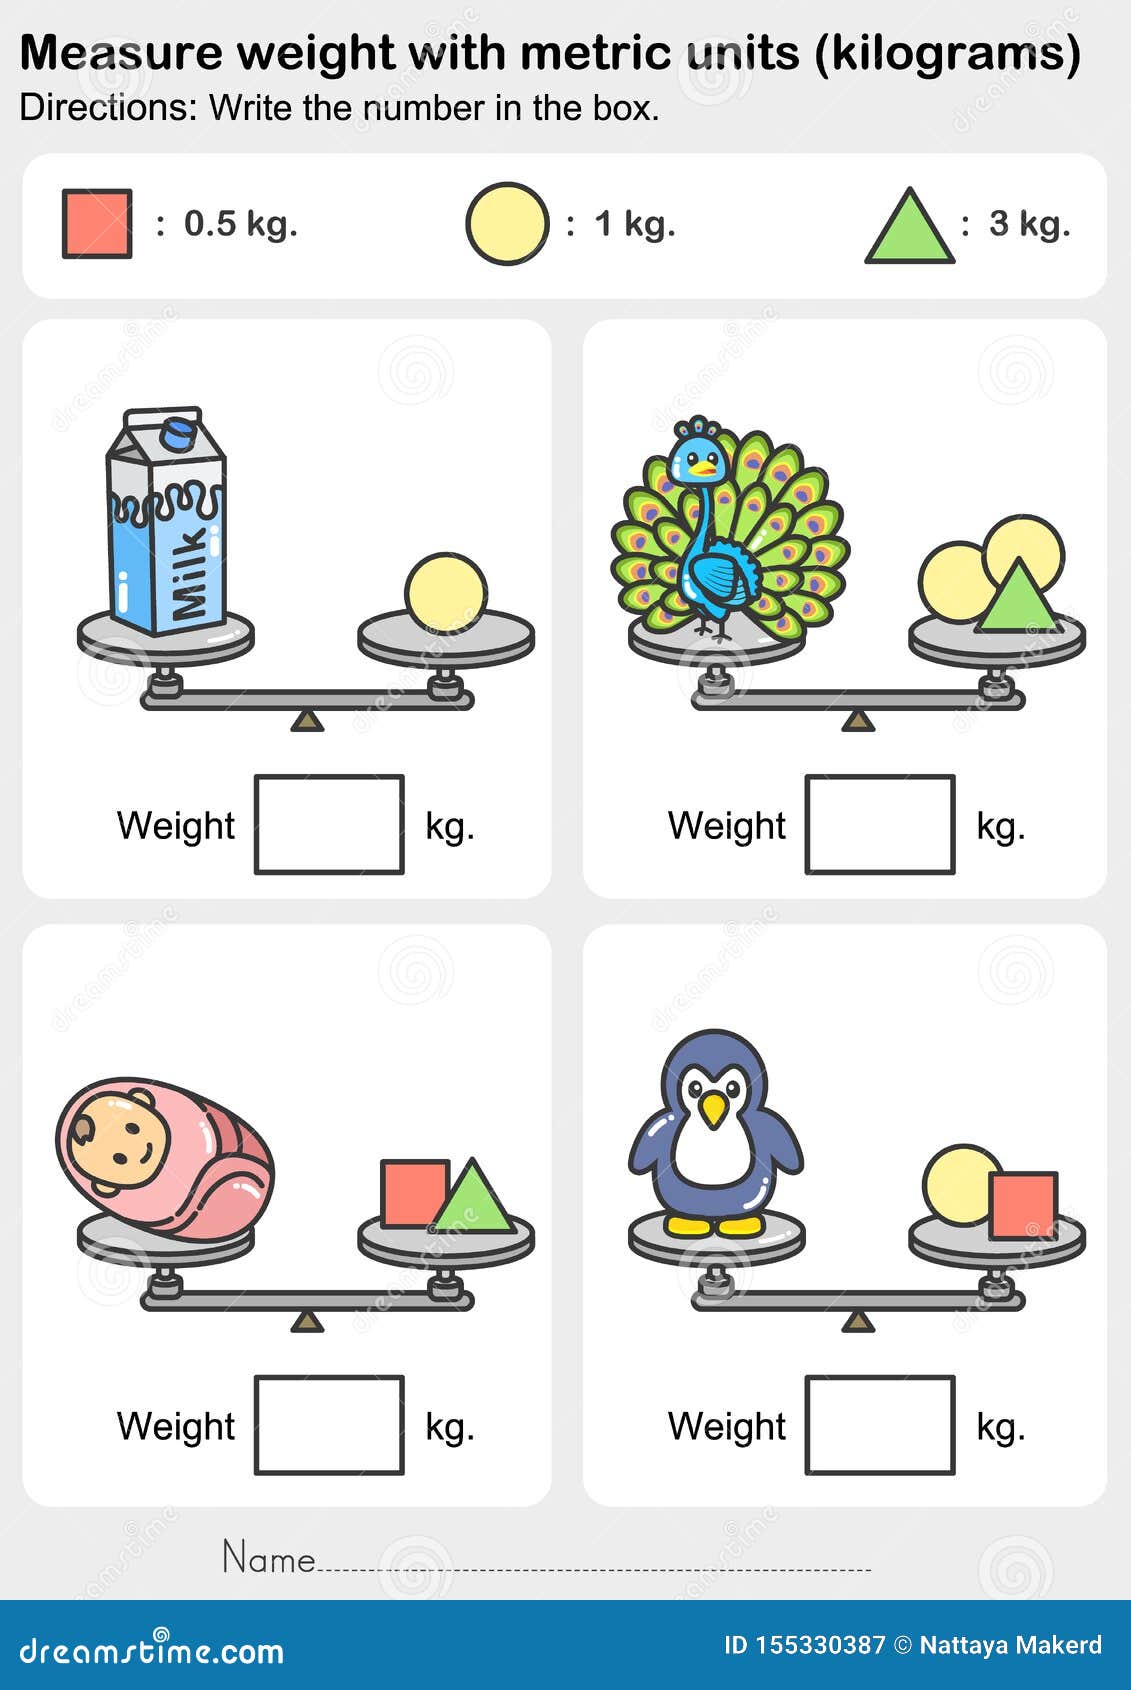 Weight Measurement Worksheet - Measure Weight With Metric Units